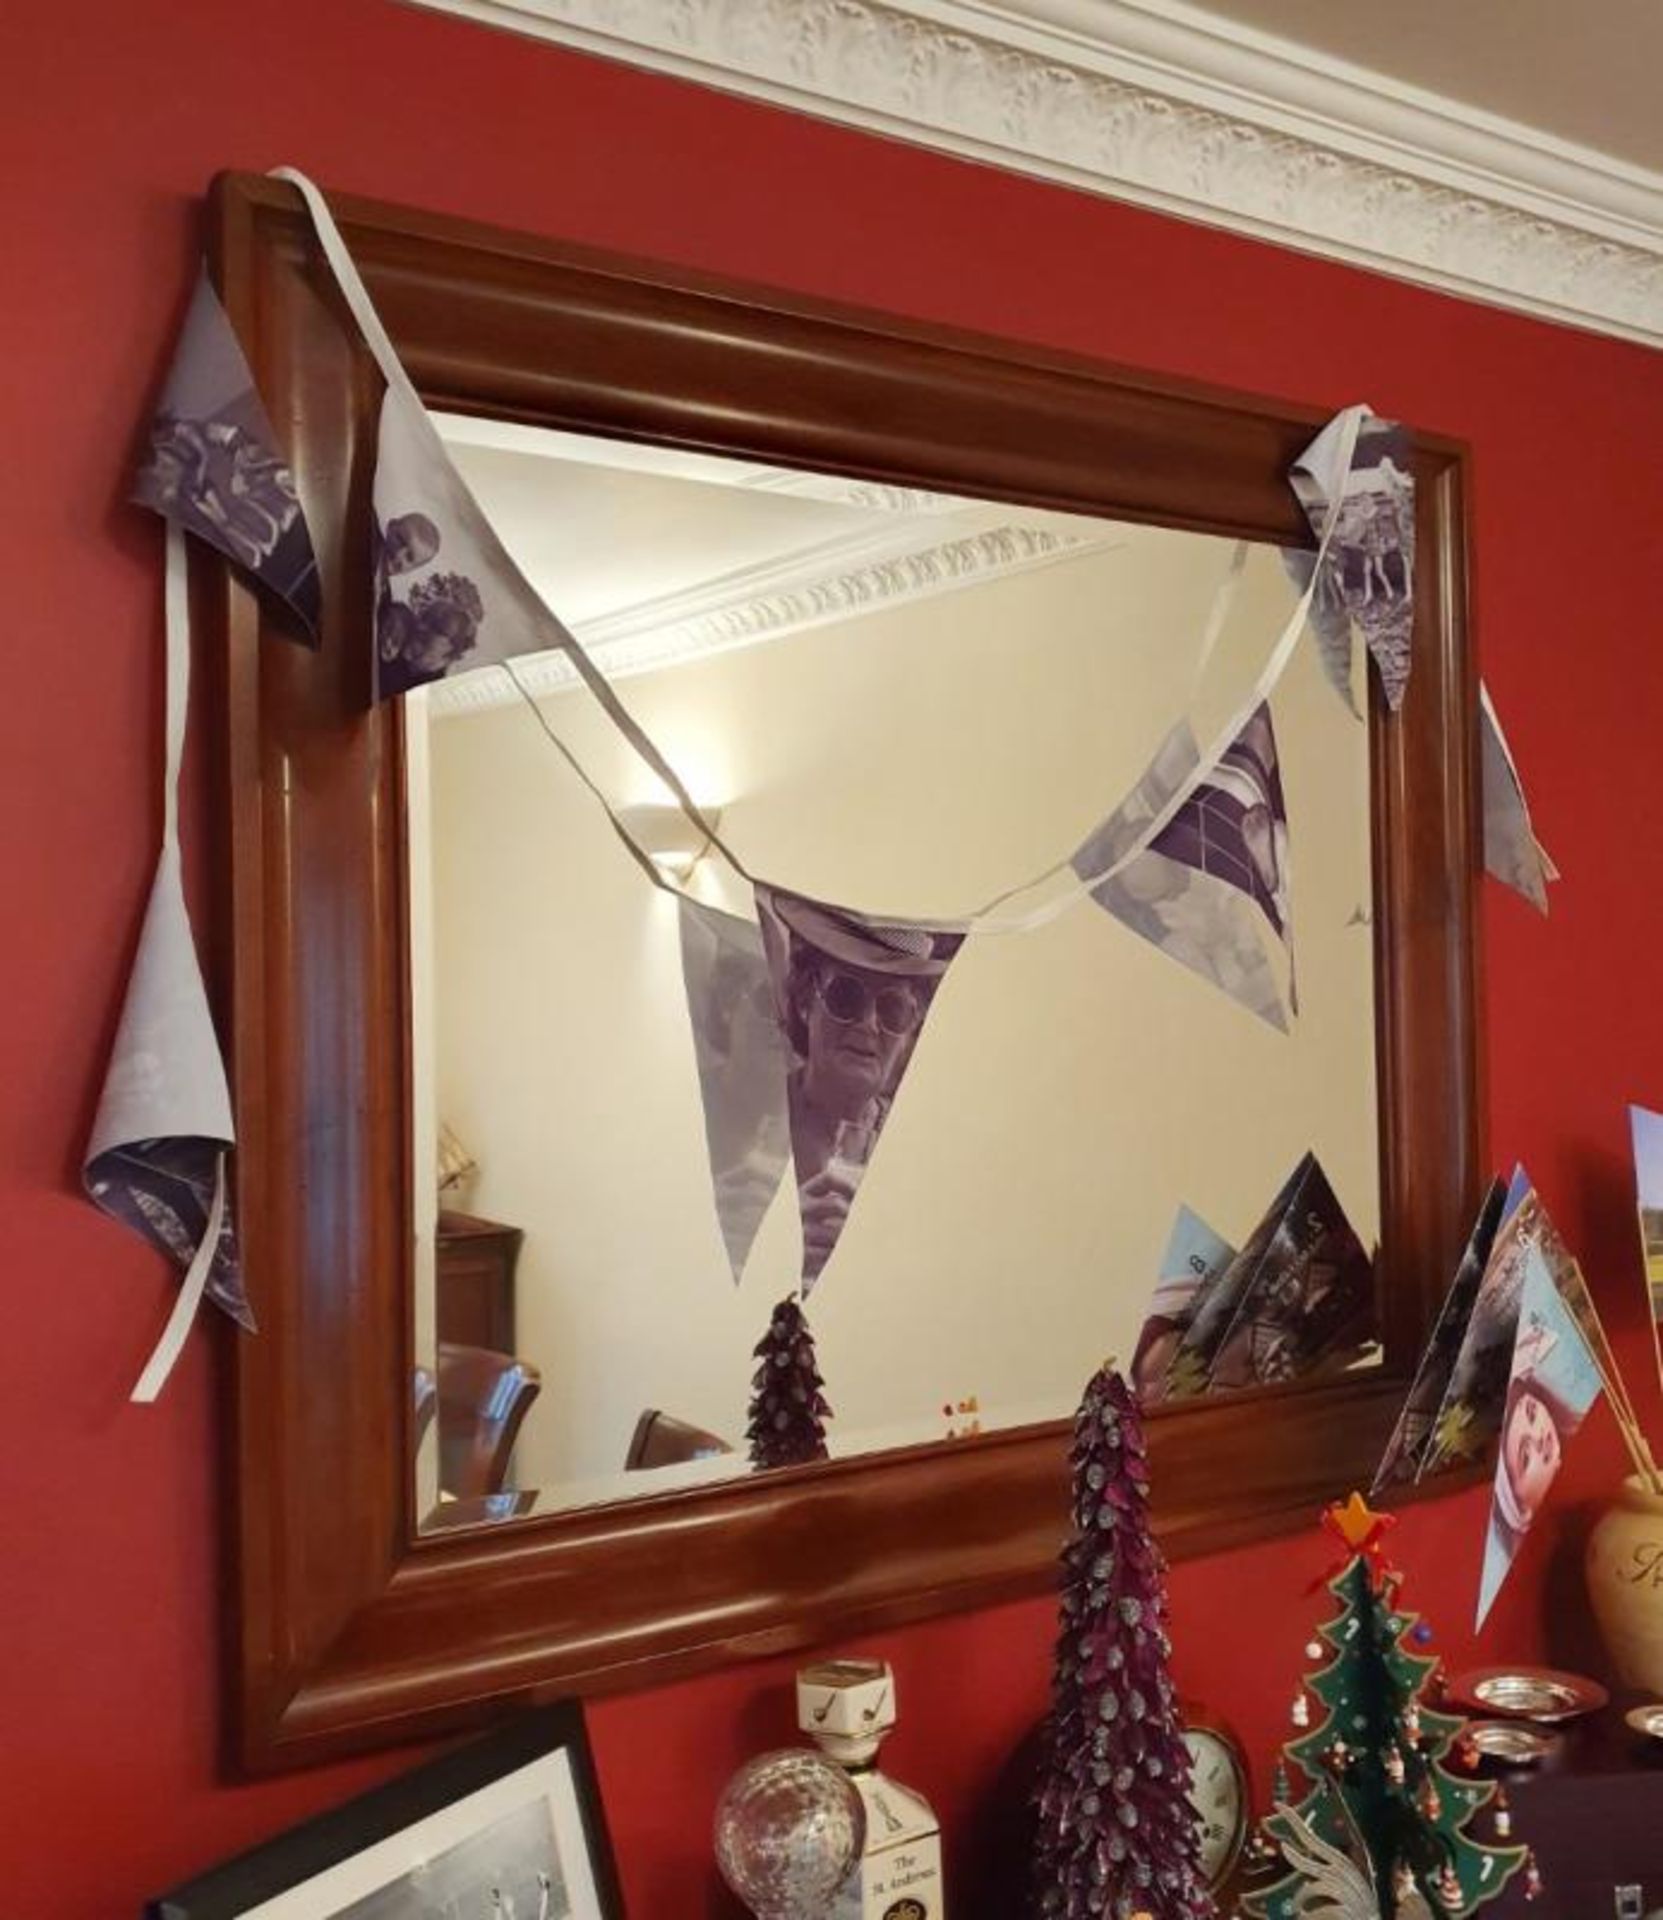 1 x GRANGE Framed Mirror in Cherry Wood - CL473 - Location: Bowdon WA14 - NO VAT ON HAMMER - Used In - Image 4 of 5